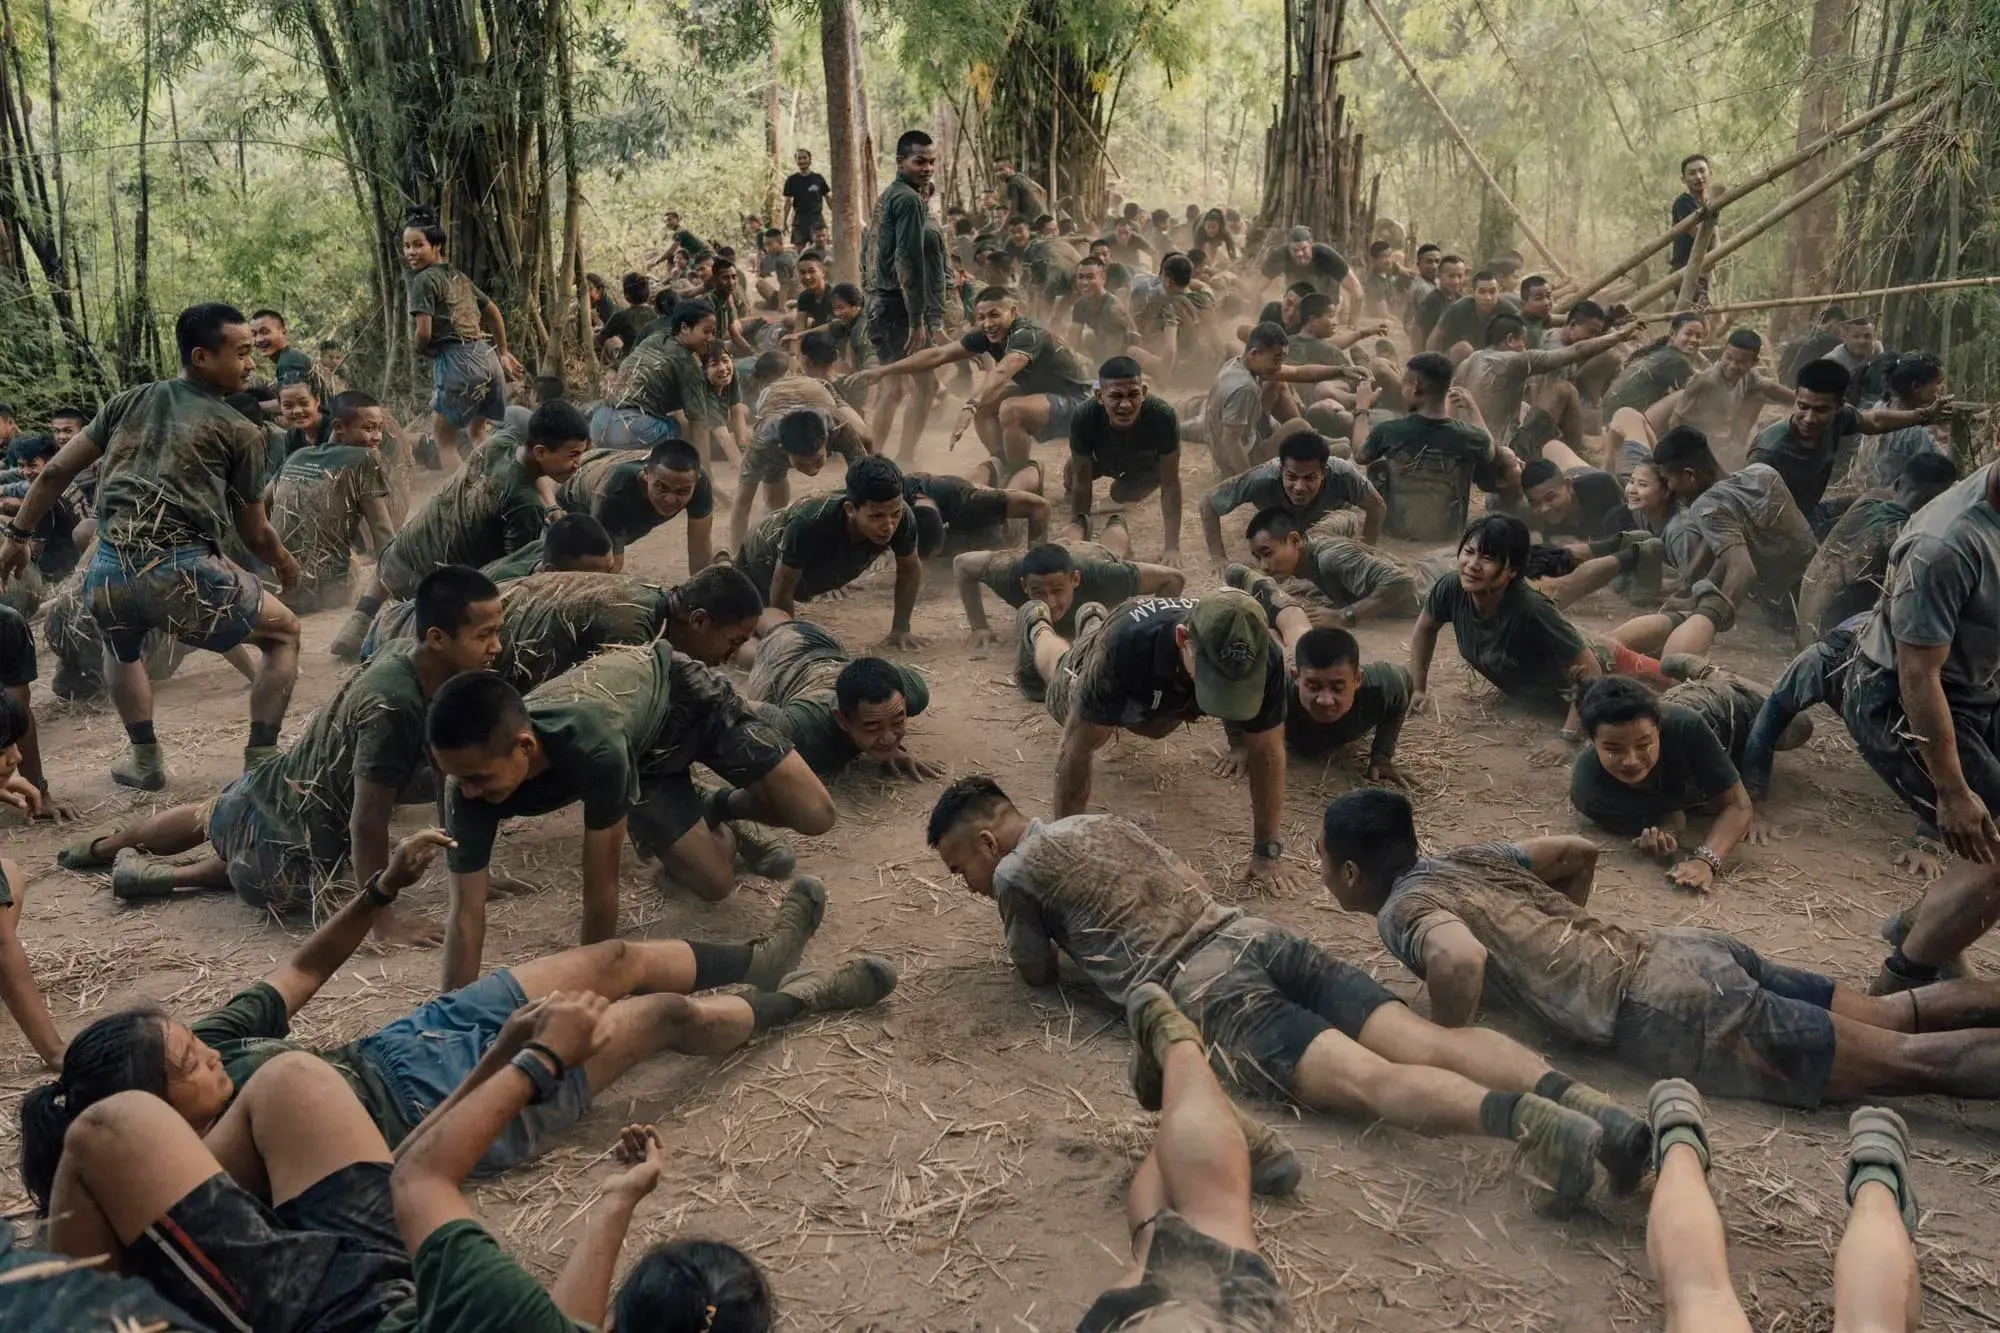 Trainees go through a pushup session as part of a “Ranger Run” they must complete to graduate. They are covered in dirt and dust